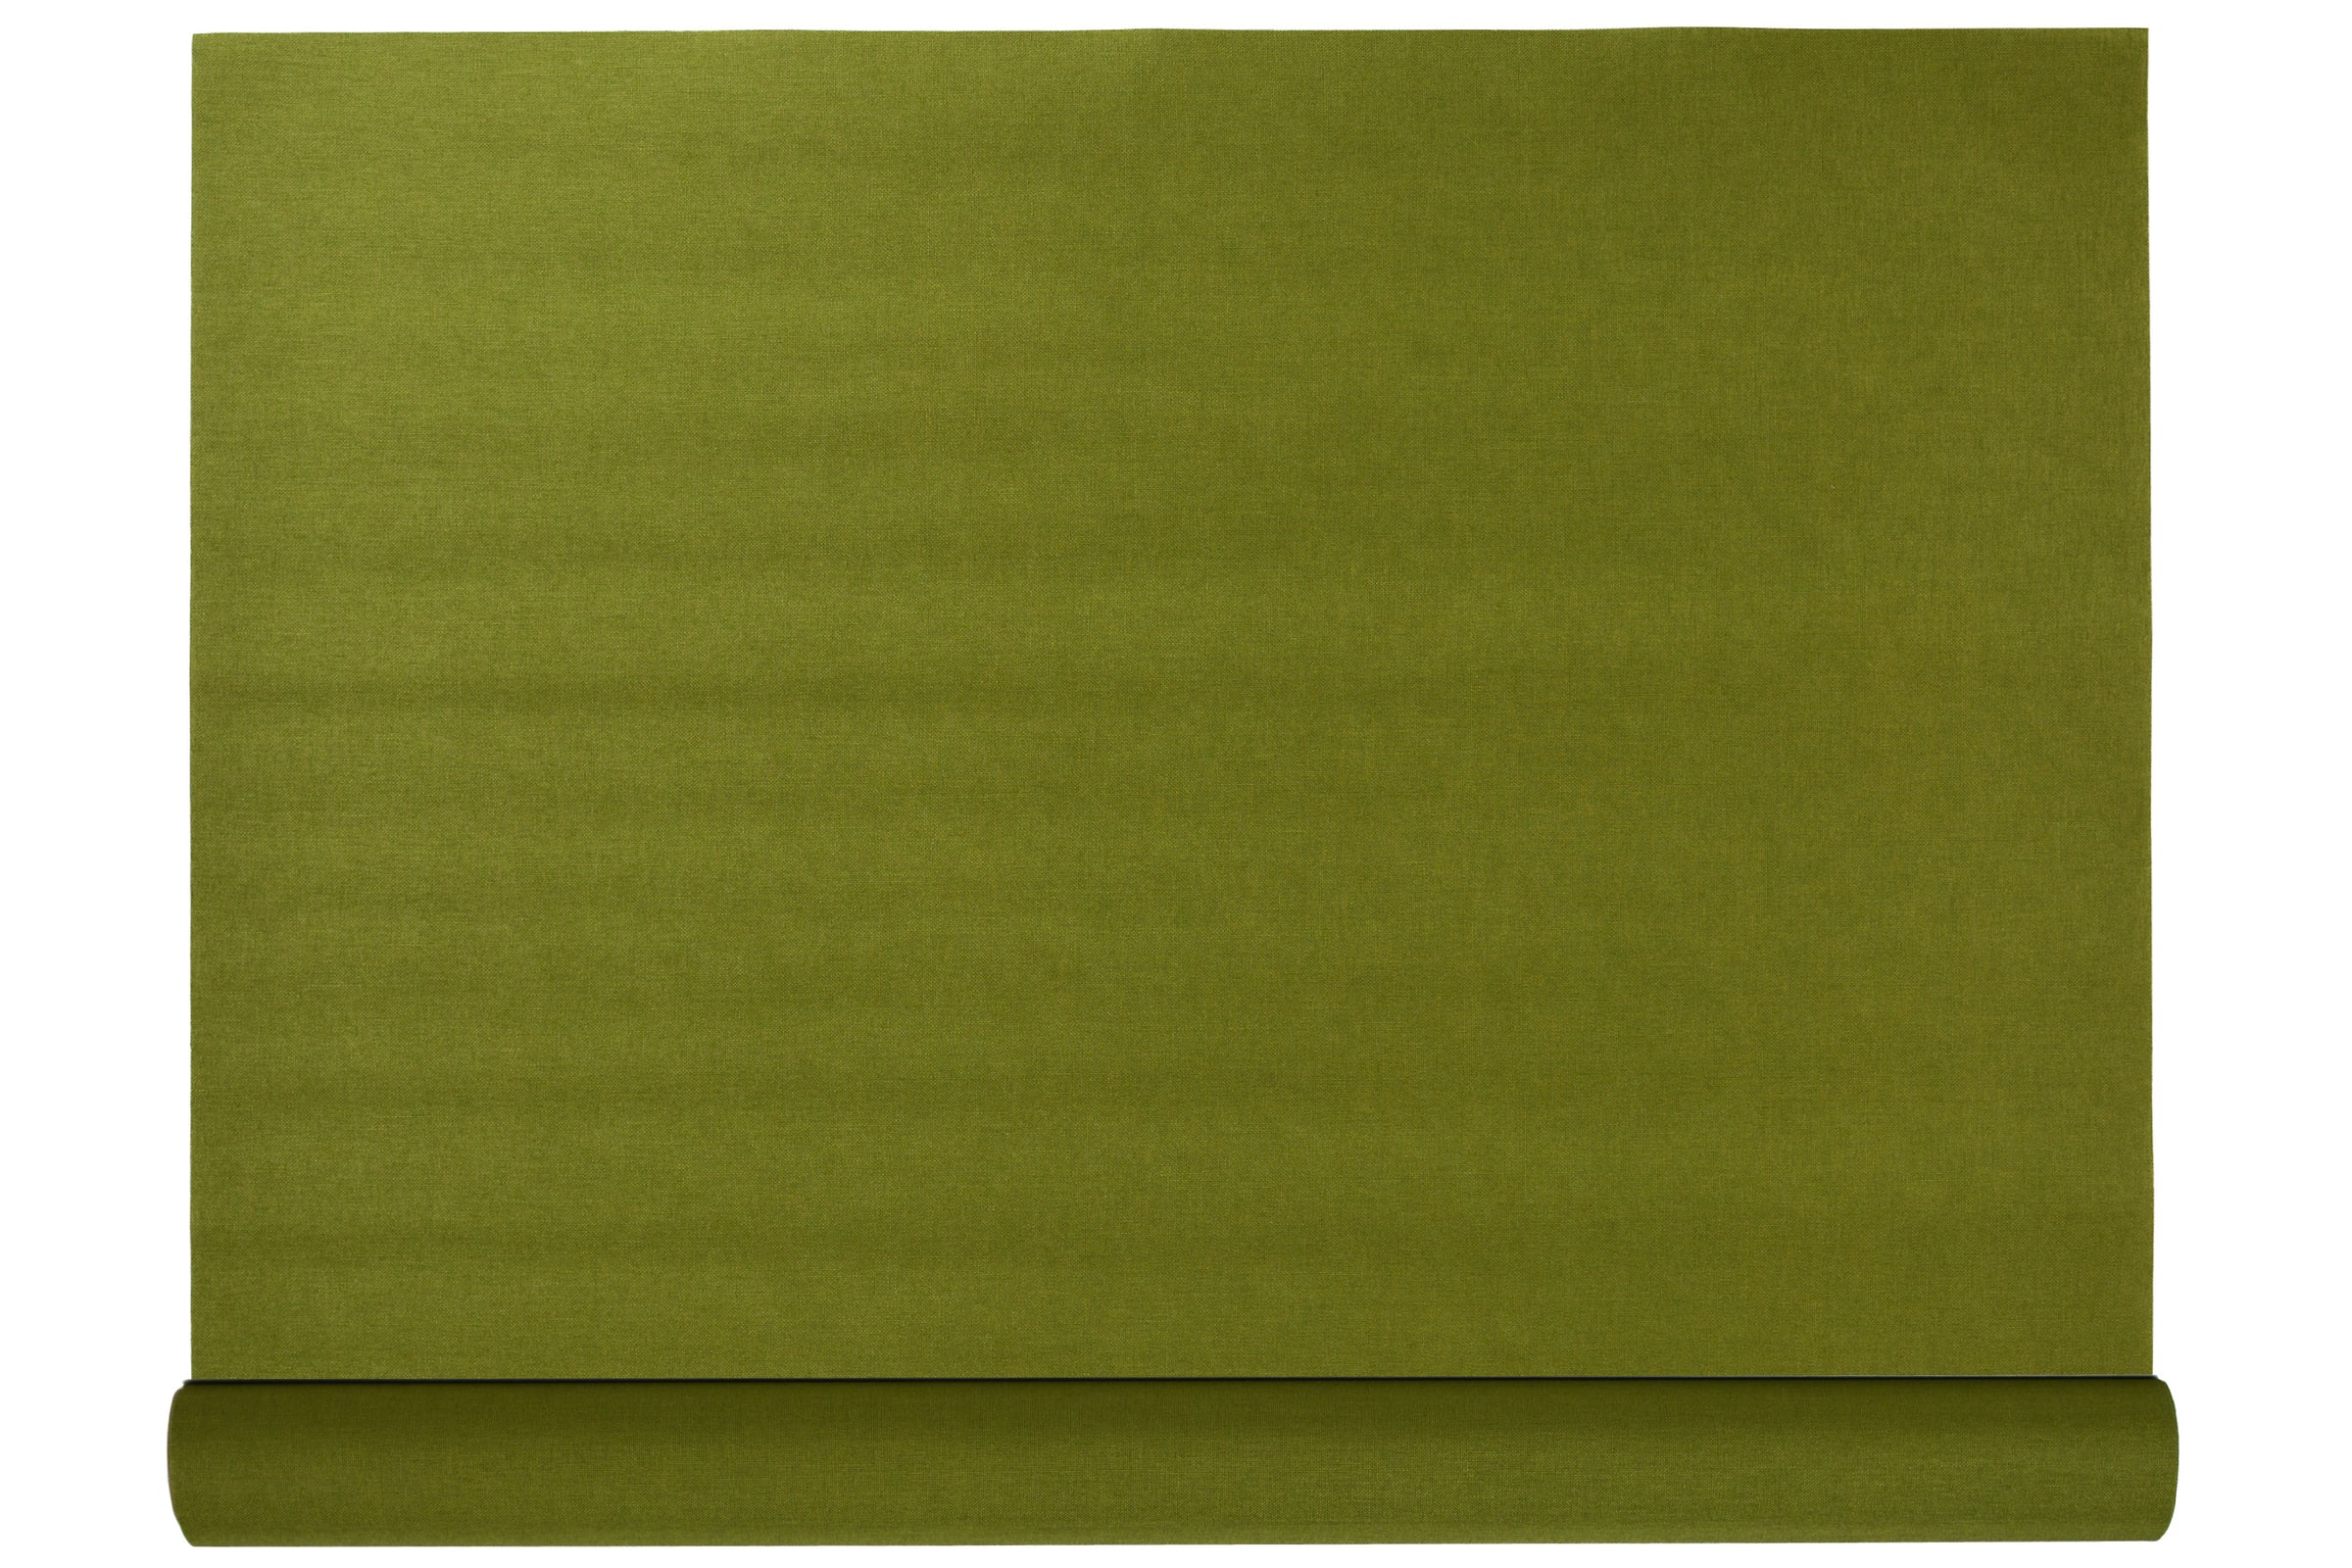 Bookcloth, 9x12, Paper-backed Fabric 